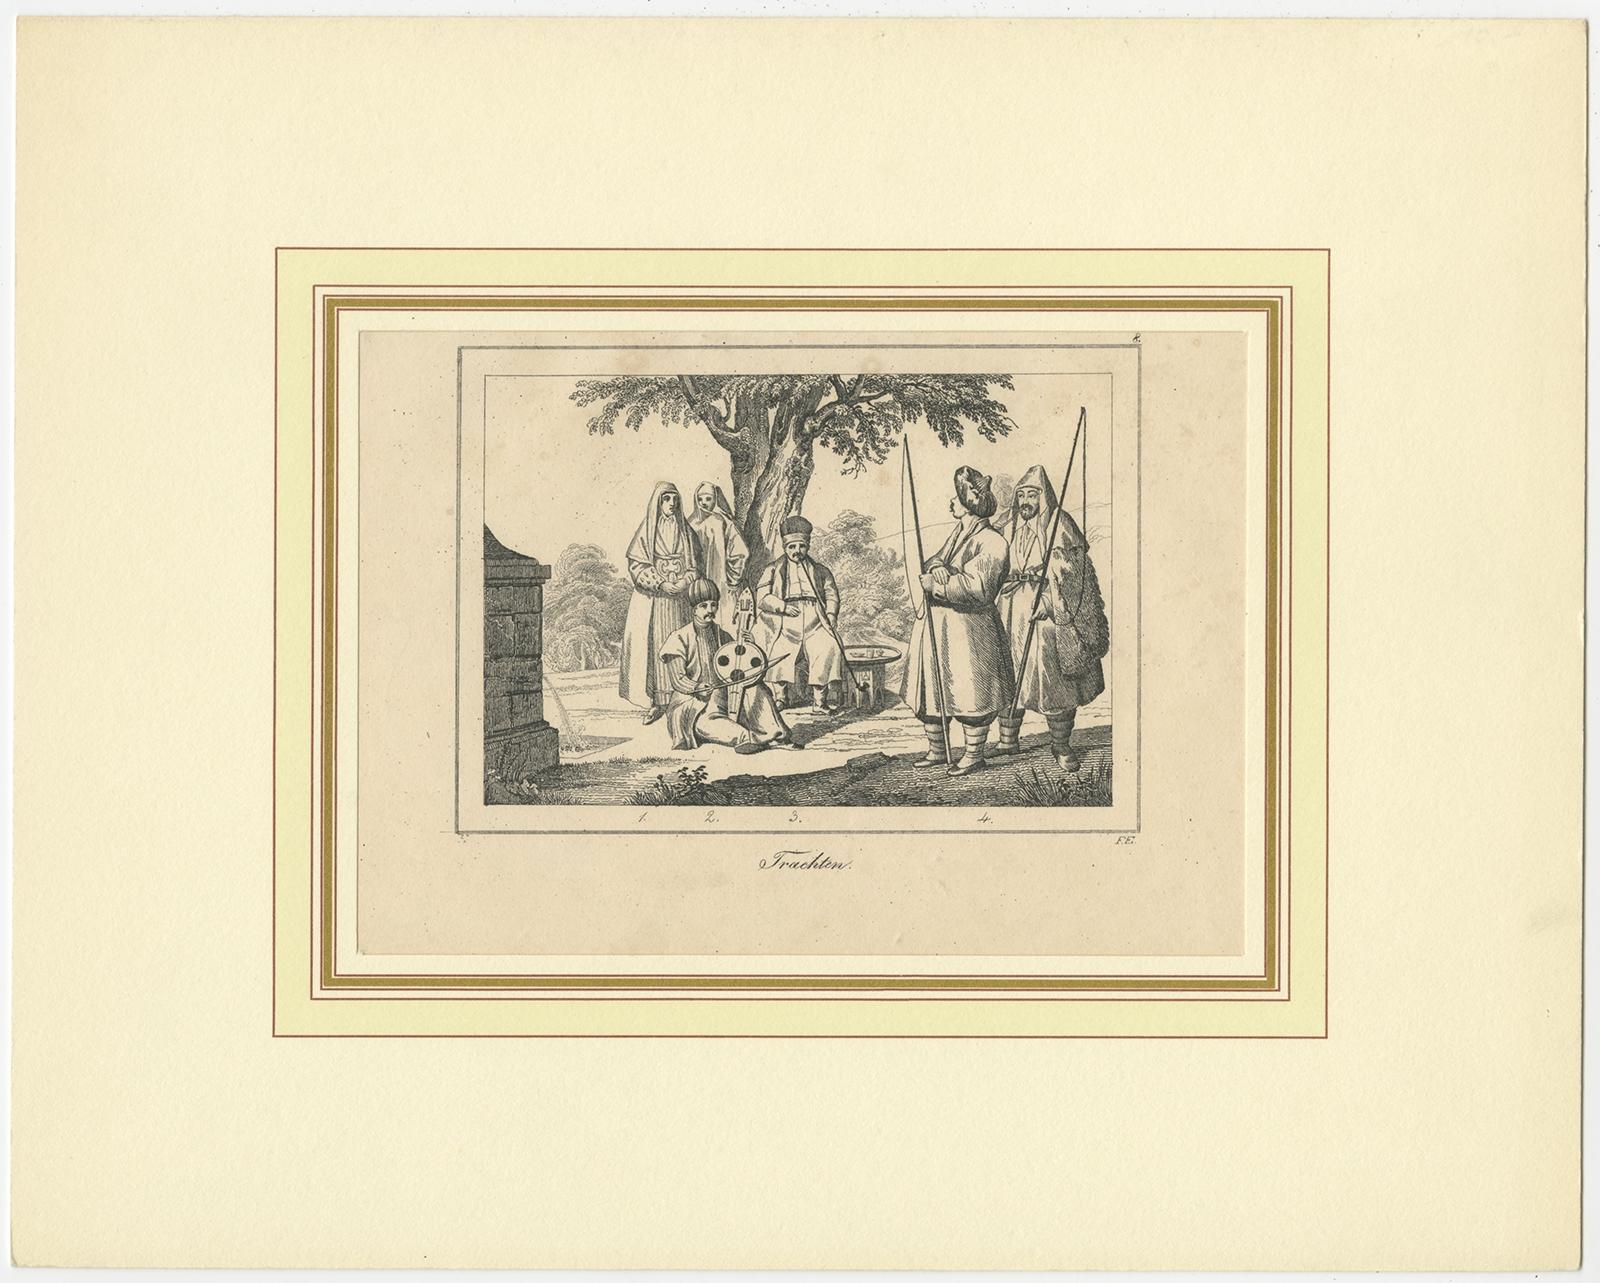 Antique print titled 'Die Krim - Trachten'. 

Original antique print of Crimean costumes. Source unknown, to be determined.

Artists and Engravers: Anonymous.